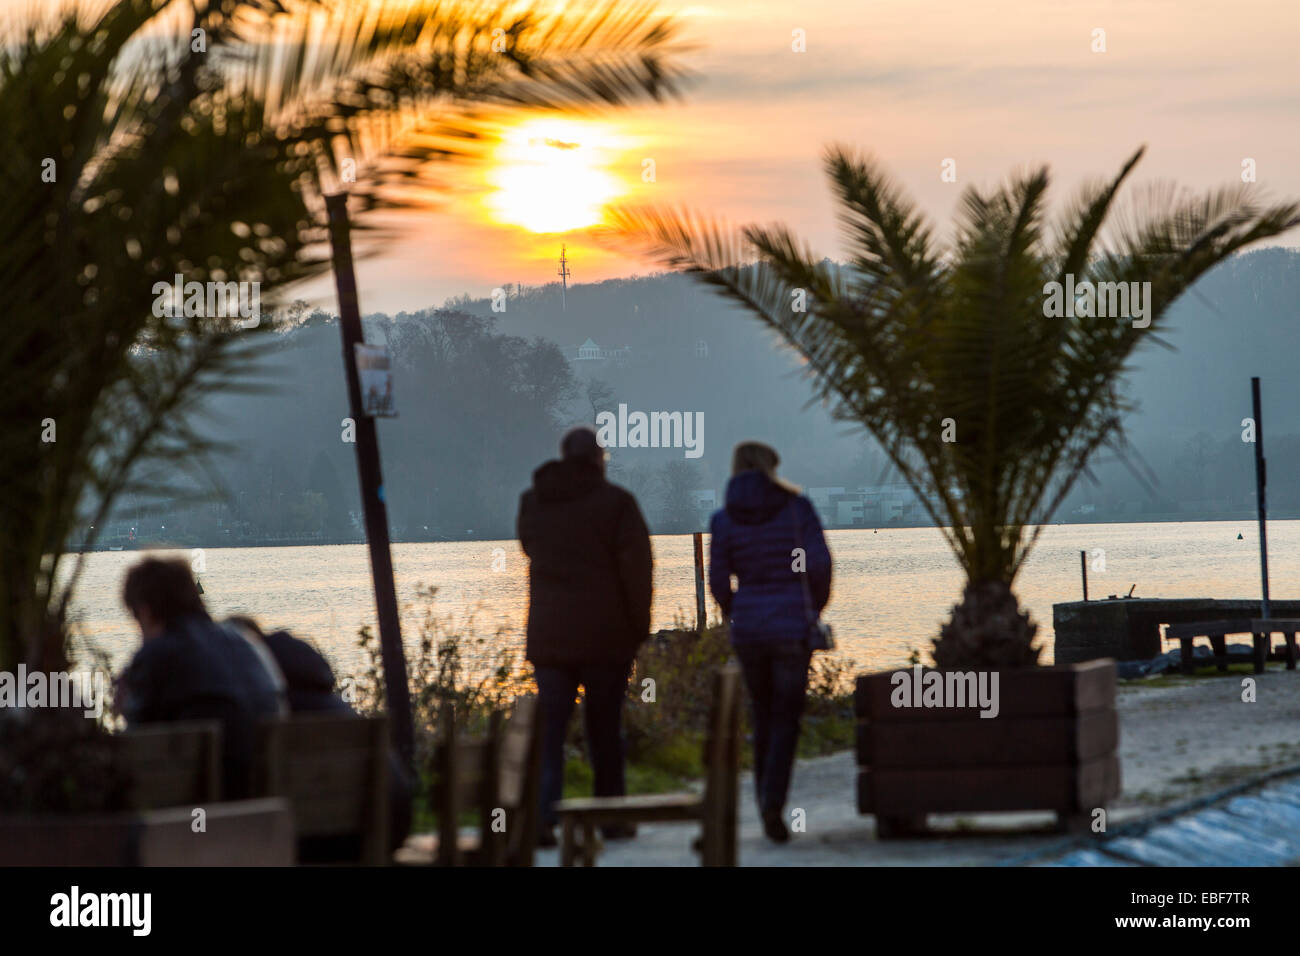 Sunset over the Baldeneysee Essen, Ruhr an artificial lake, the shores of Seaside Beach Club Stock Photo